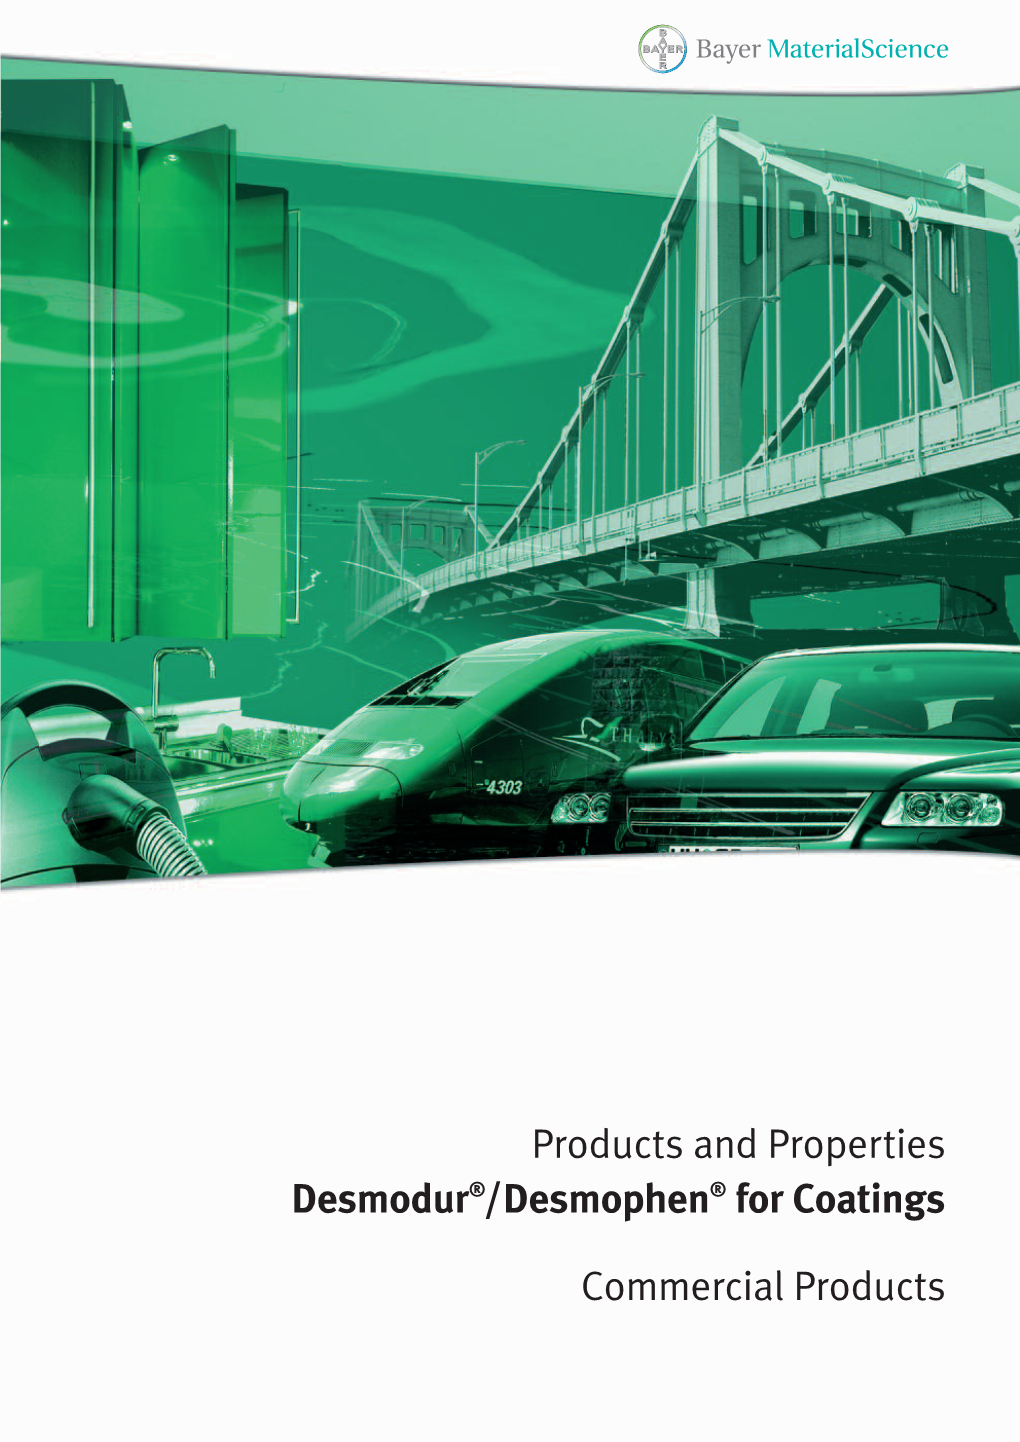 Products and Properties Desmodur®/Desmophen® for Coatings